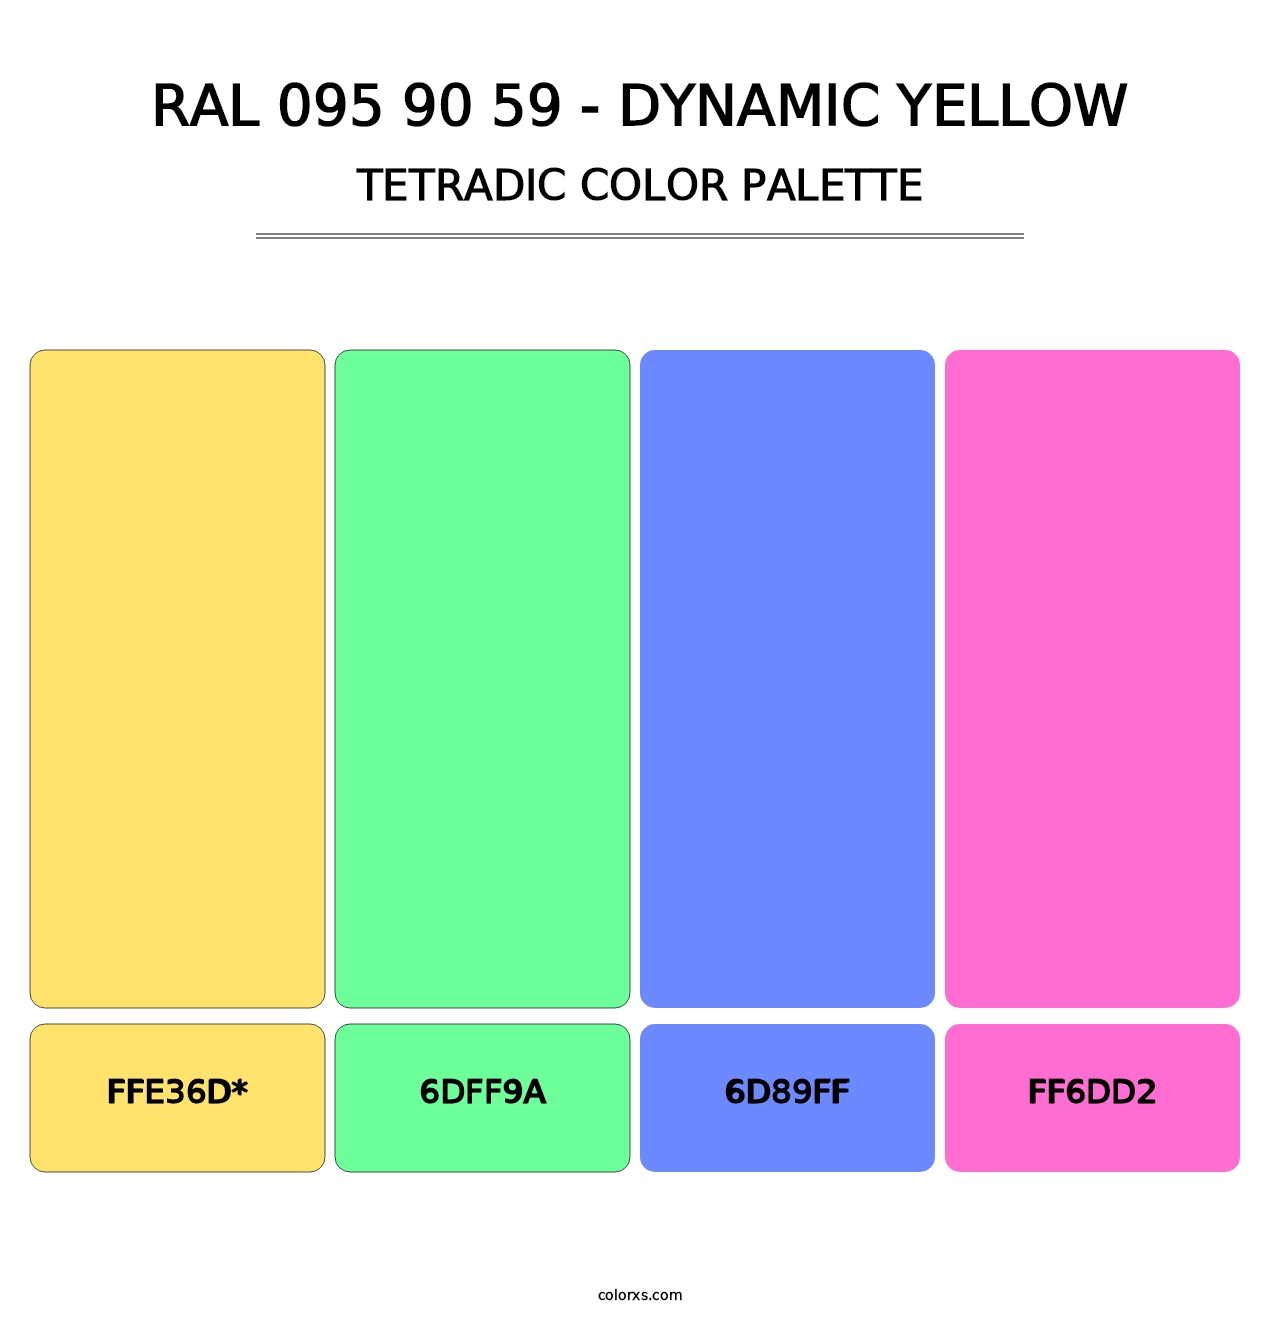 RAL 095 90 59 - Dynamic Yellow - Tetradic Color Palette